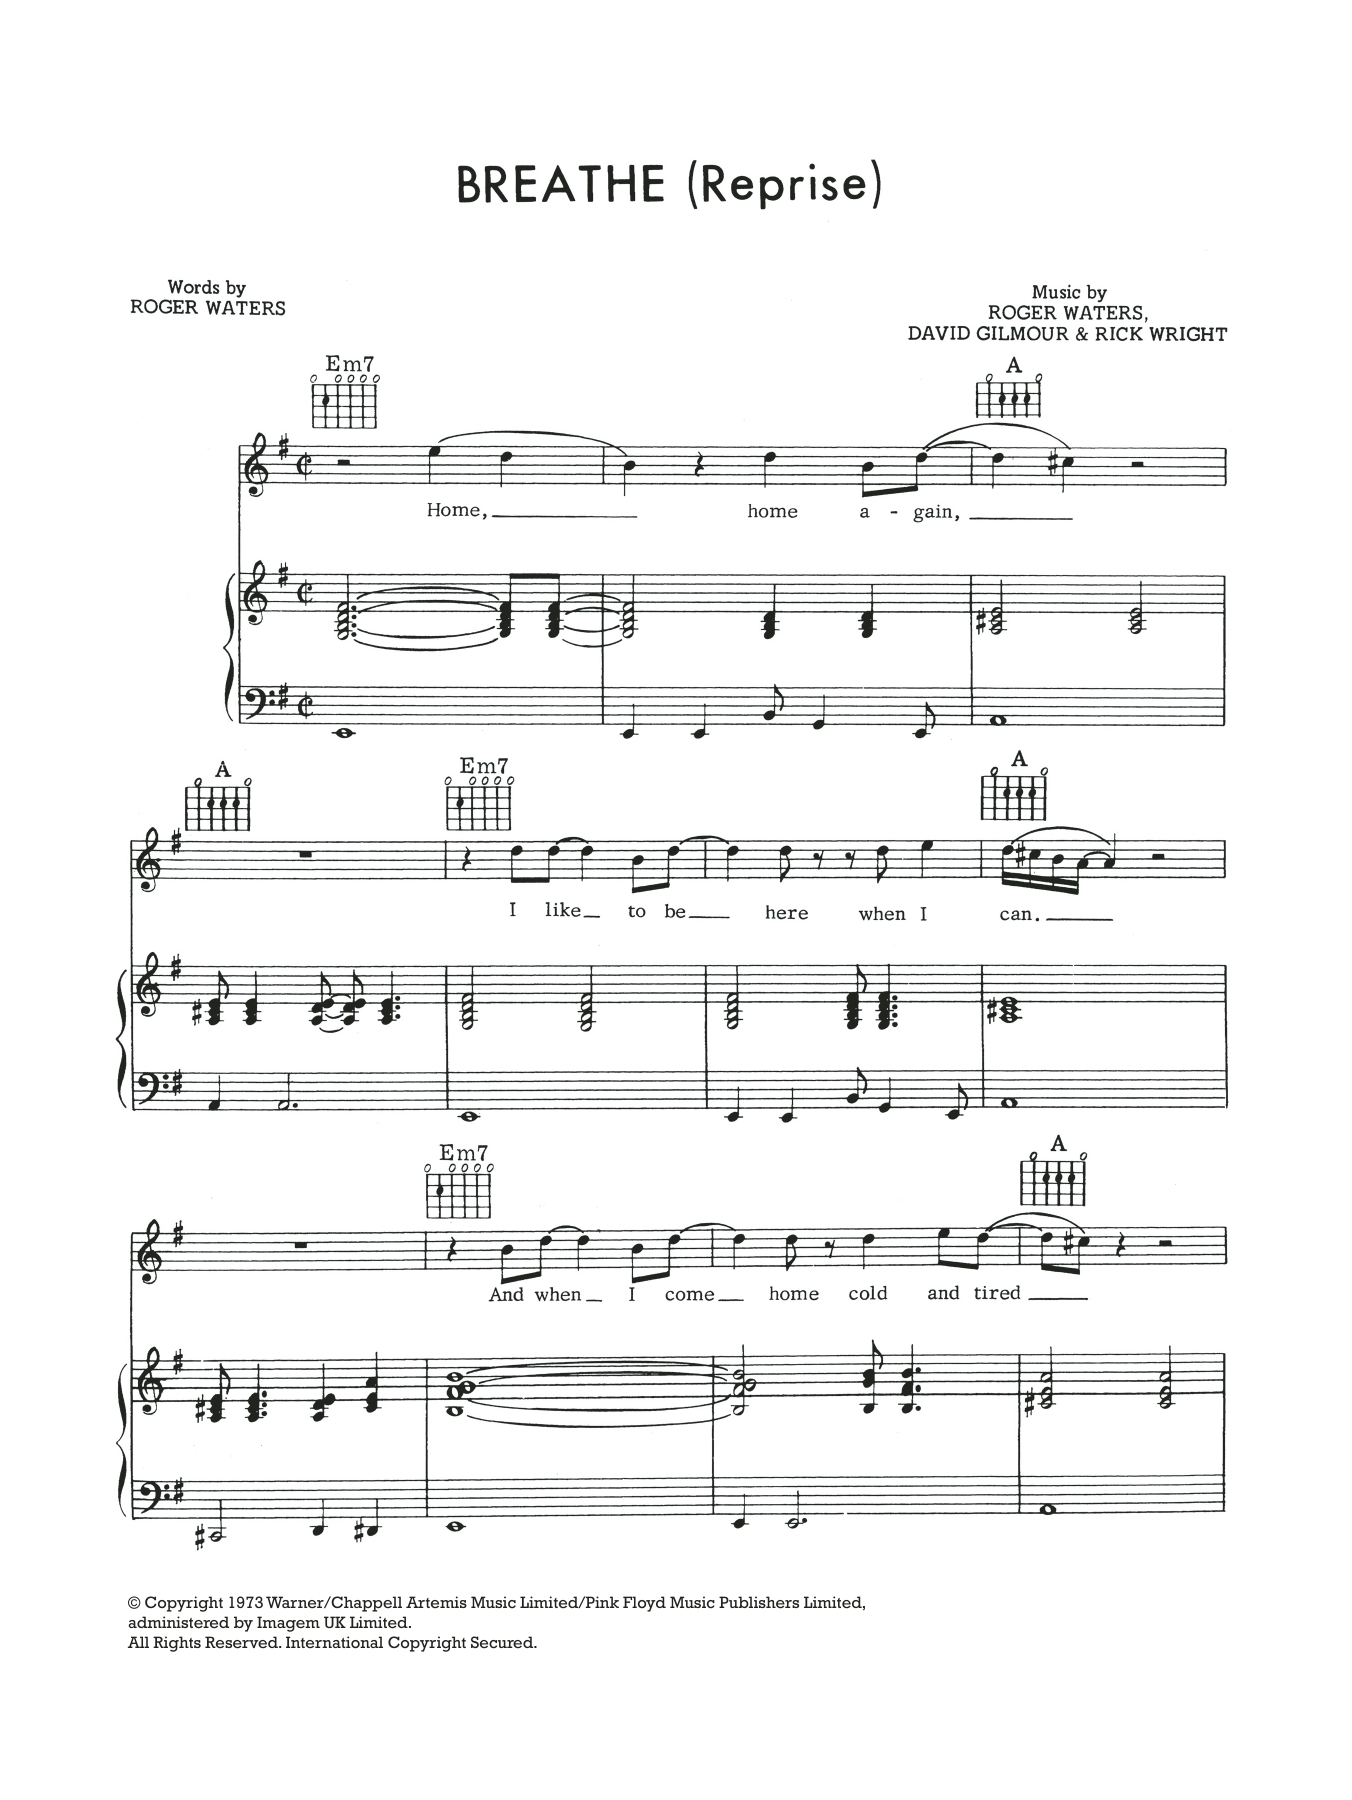 Download Pink Floyd Breathe (In The Air) (Reprise) Sheet Music